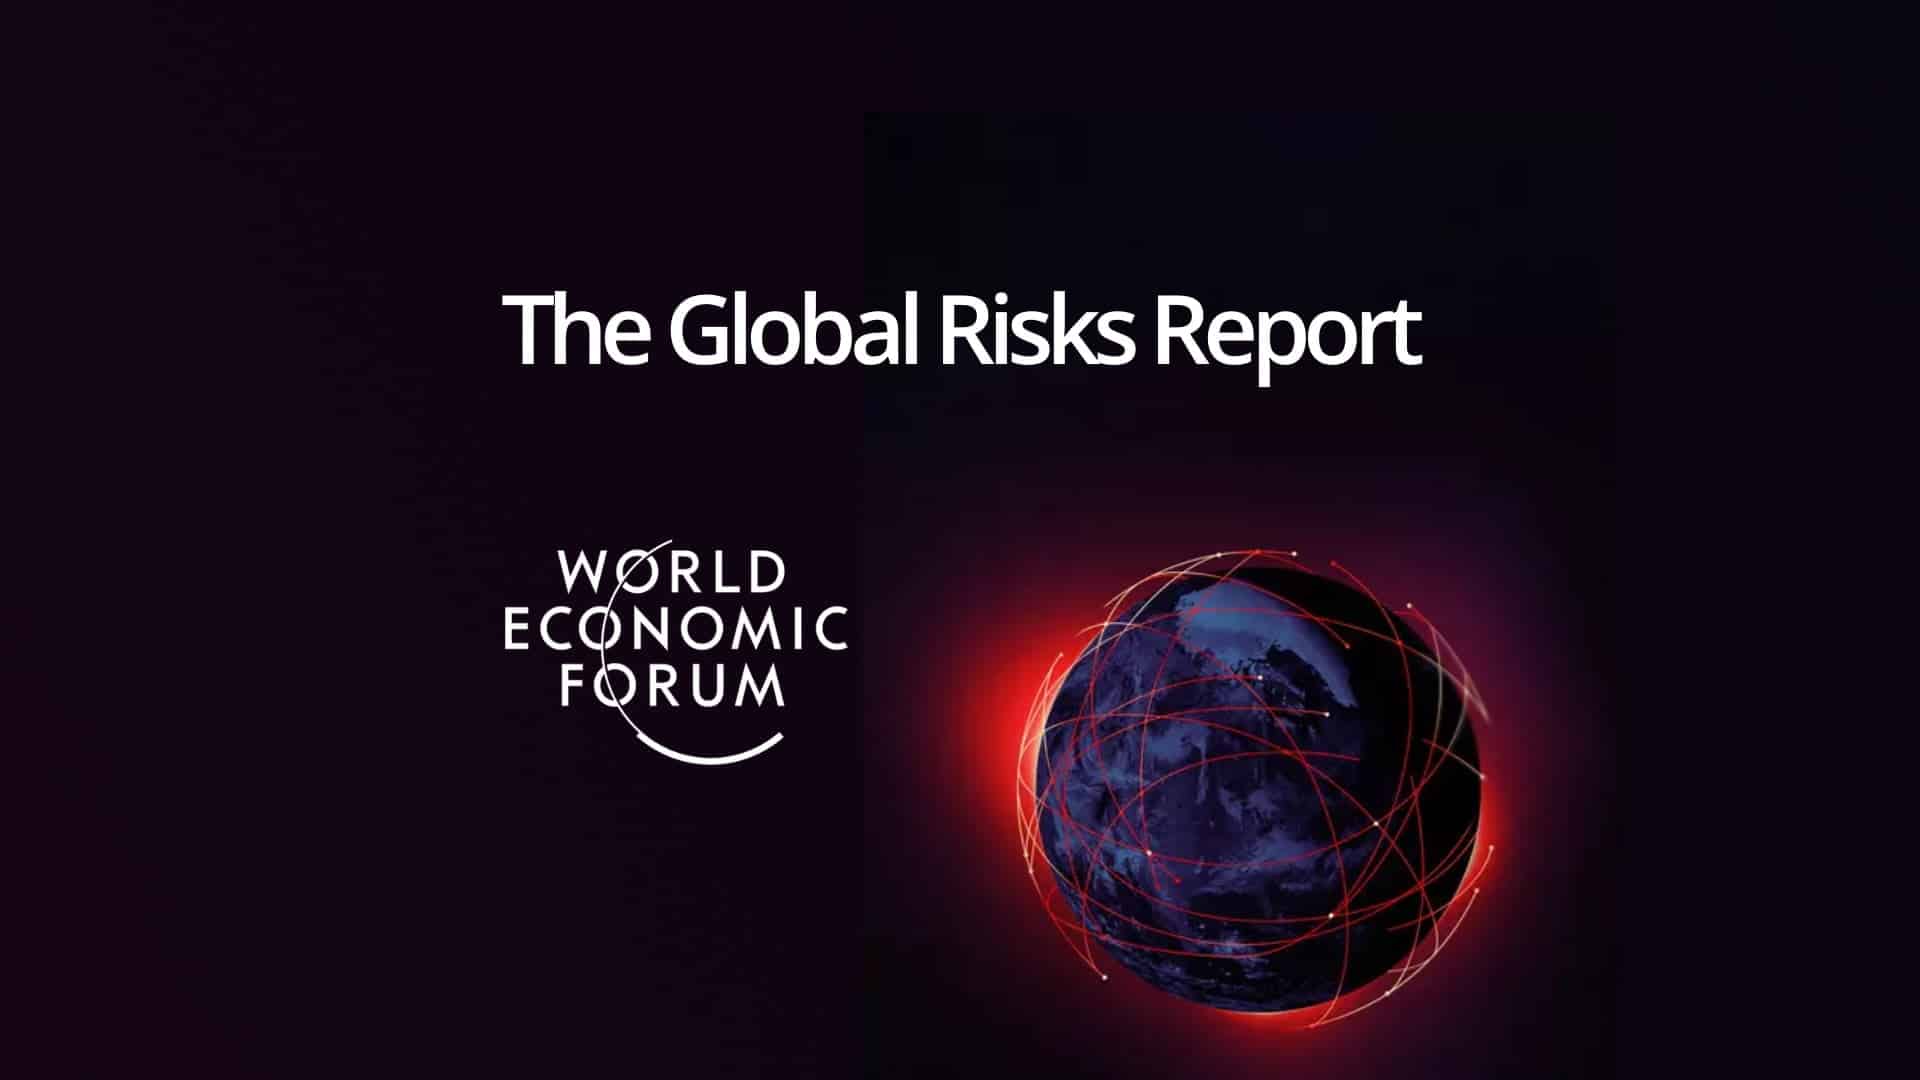 The Global Risks Report thefuture